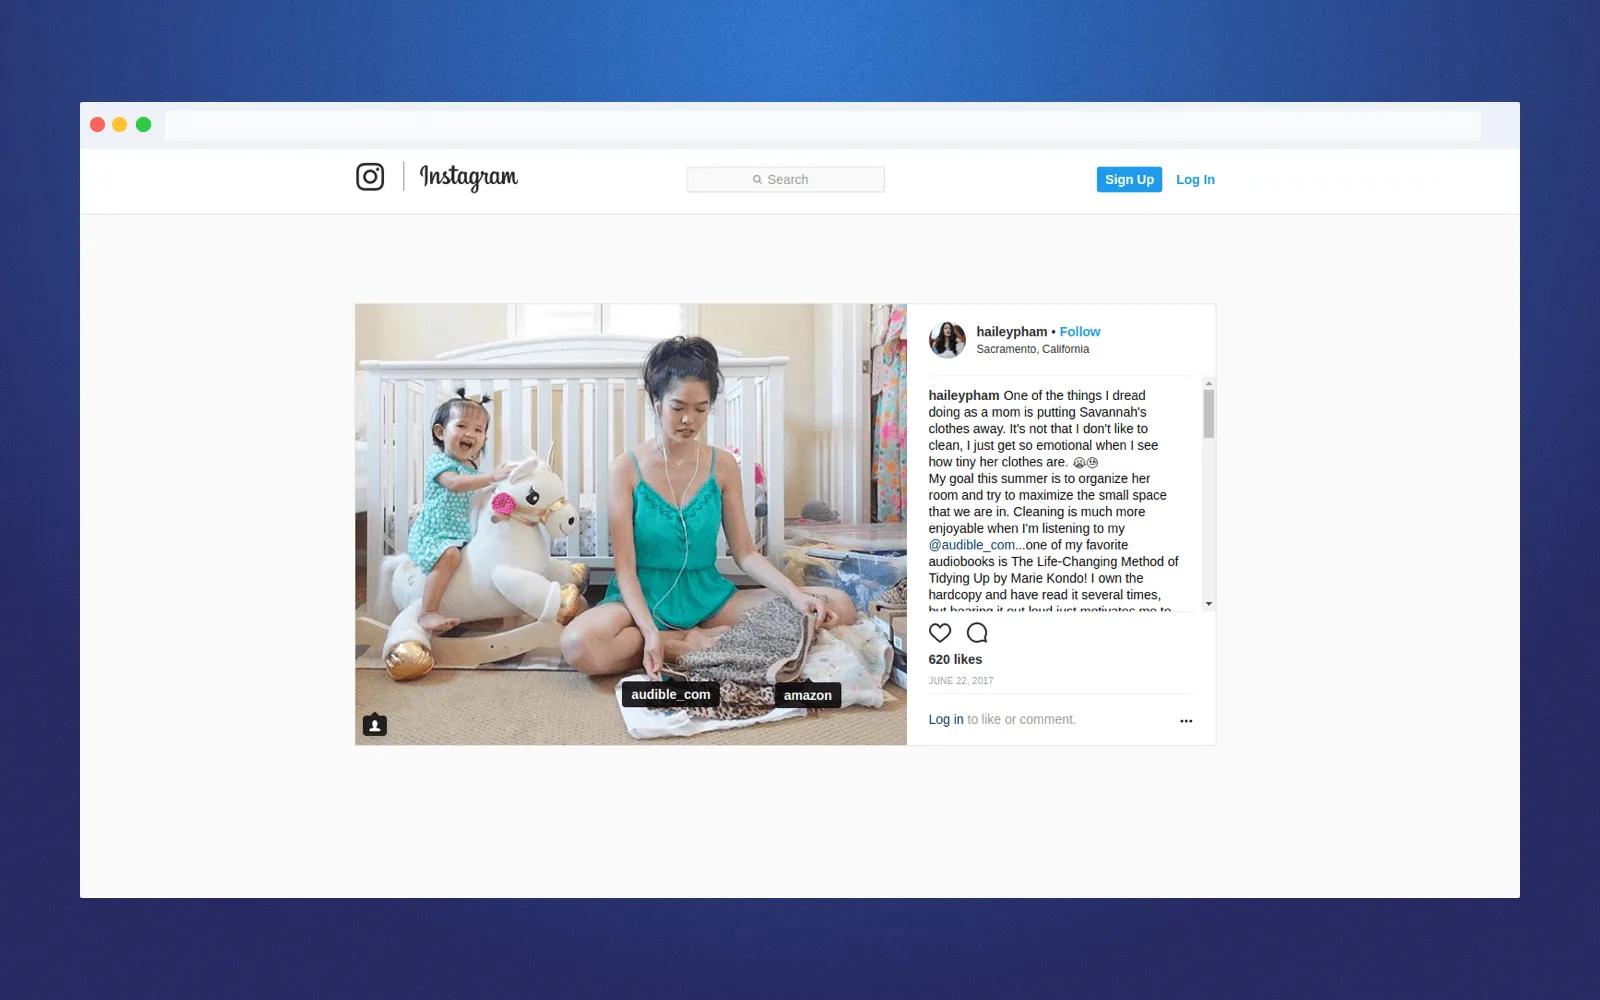 Amazon uses micro-influencer marketing to promote it's digital products